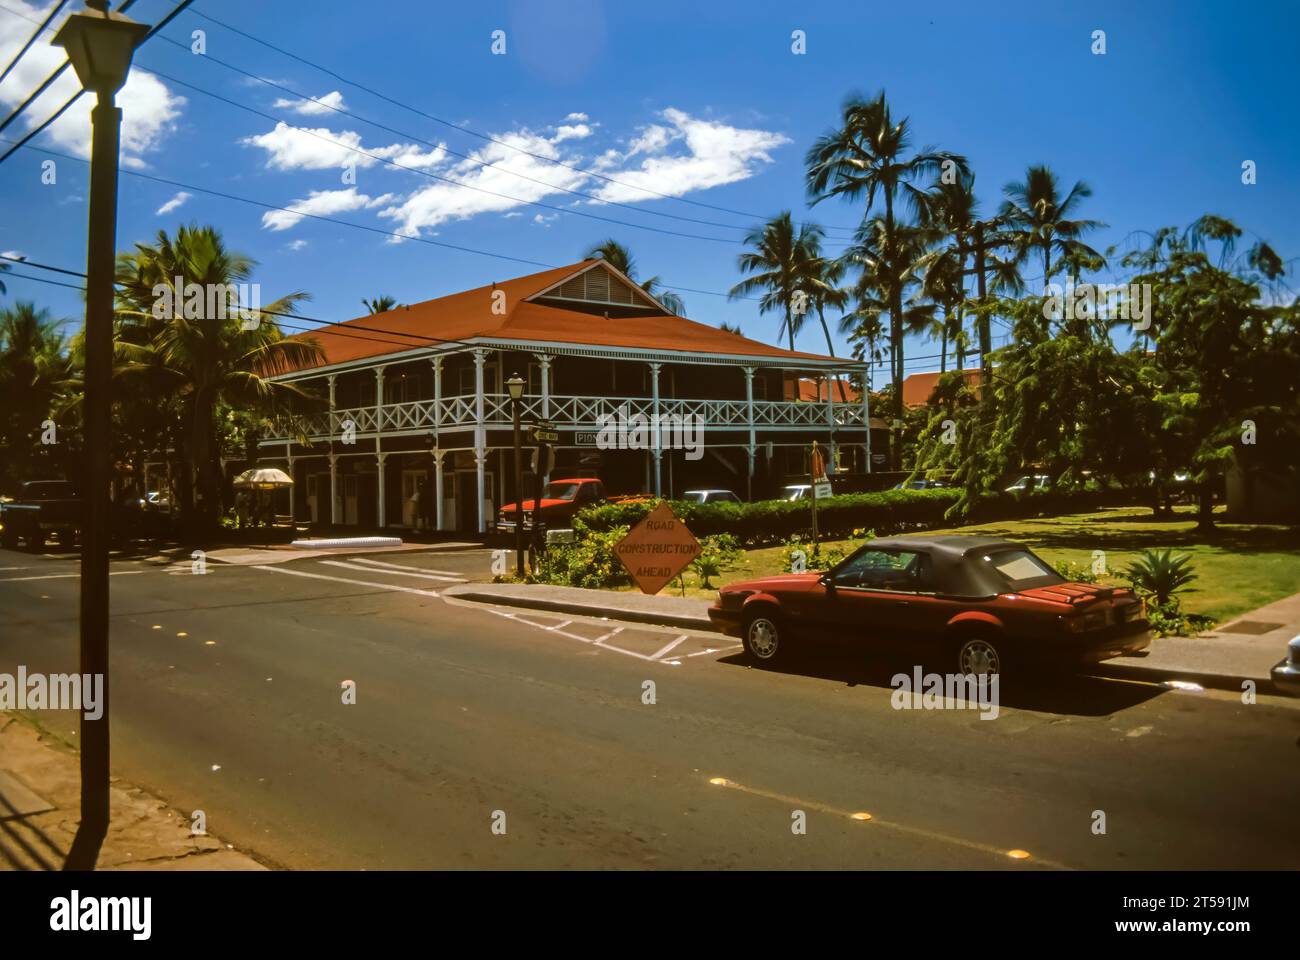 Lahaina, Maui, Hawaii, June 2, 1989 - Old Slide of The Pioneer Inn, With It's Red Roof in Lahaina Harbor, on a Beautiful Sunny Summer Day Stock Photo